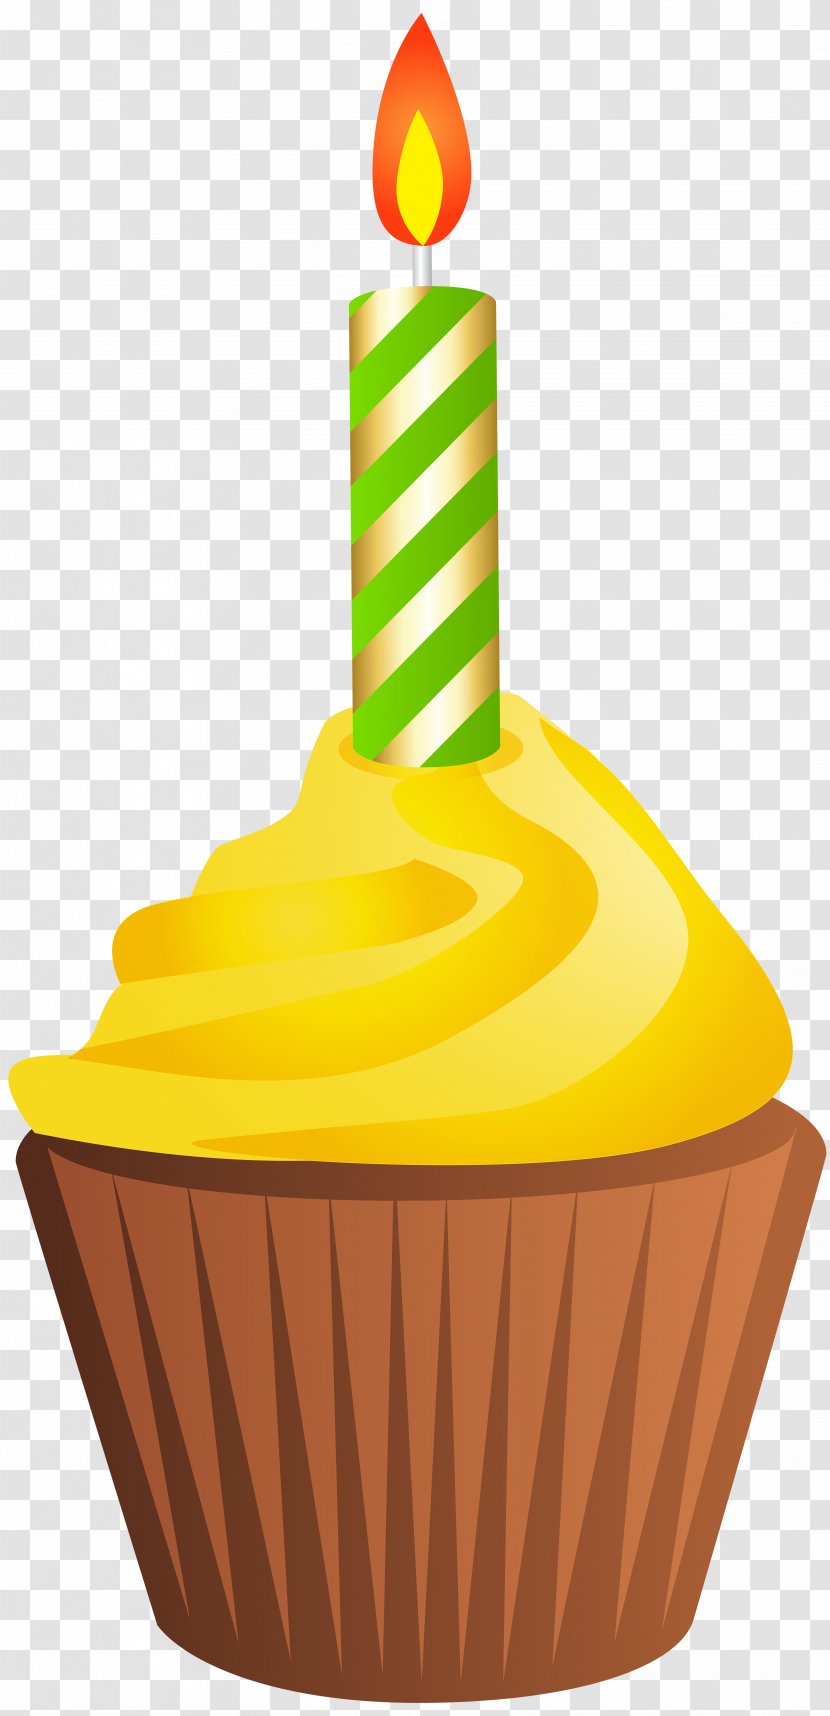 Birthday Cake Muffin Cupcake Candle Clip Art Transparent PNG